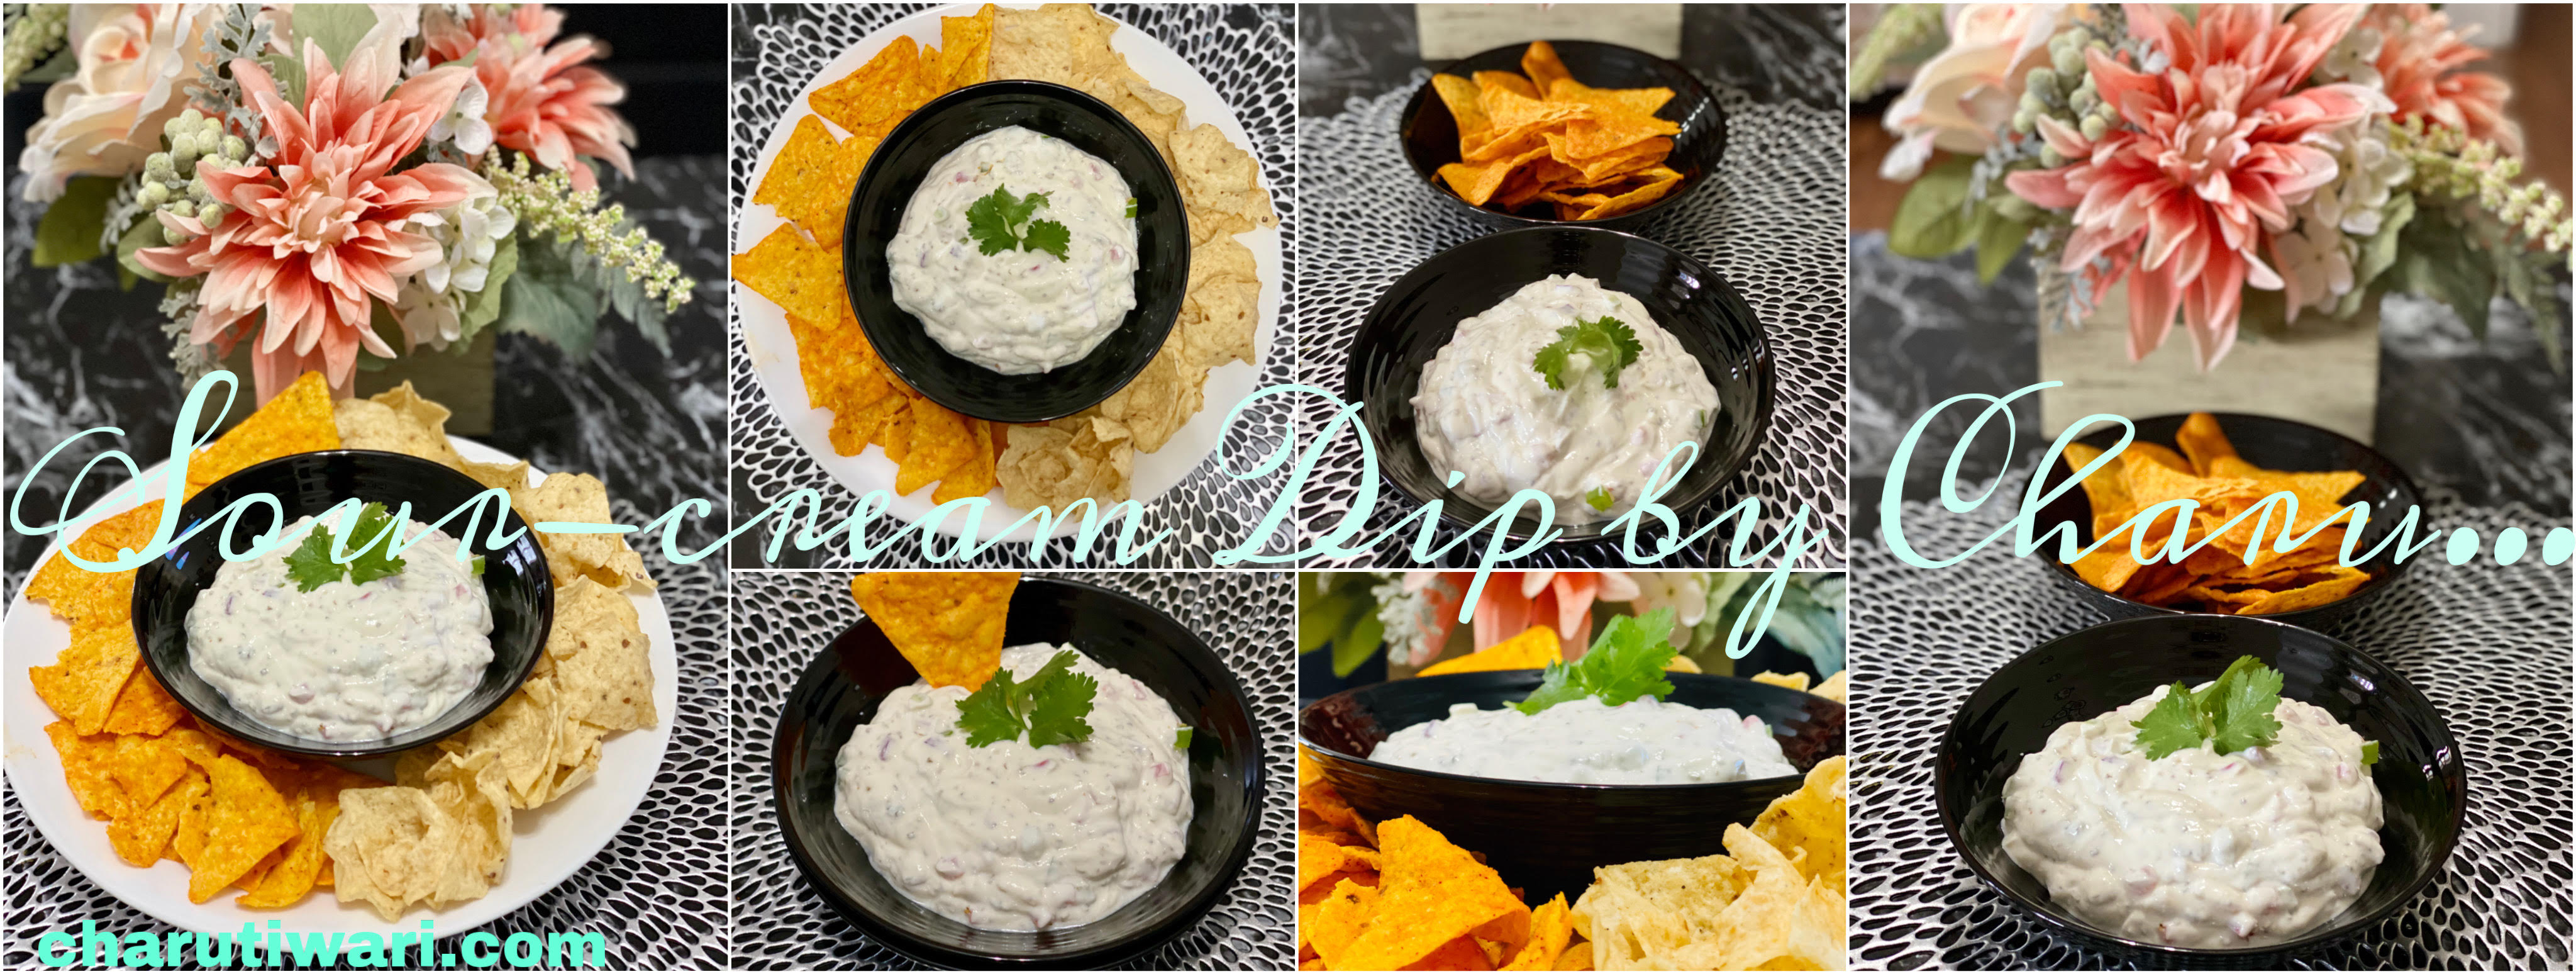 Sour-cream Dip- Plated and served with Nachos